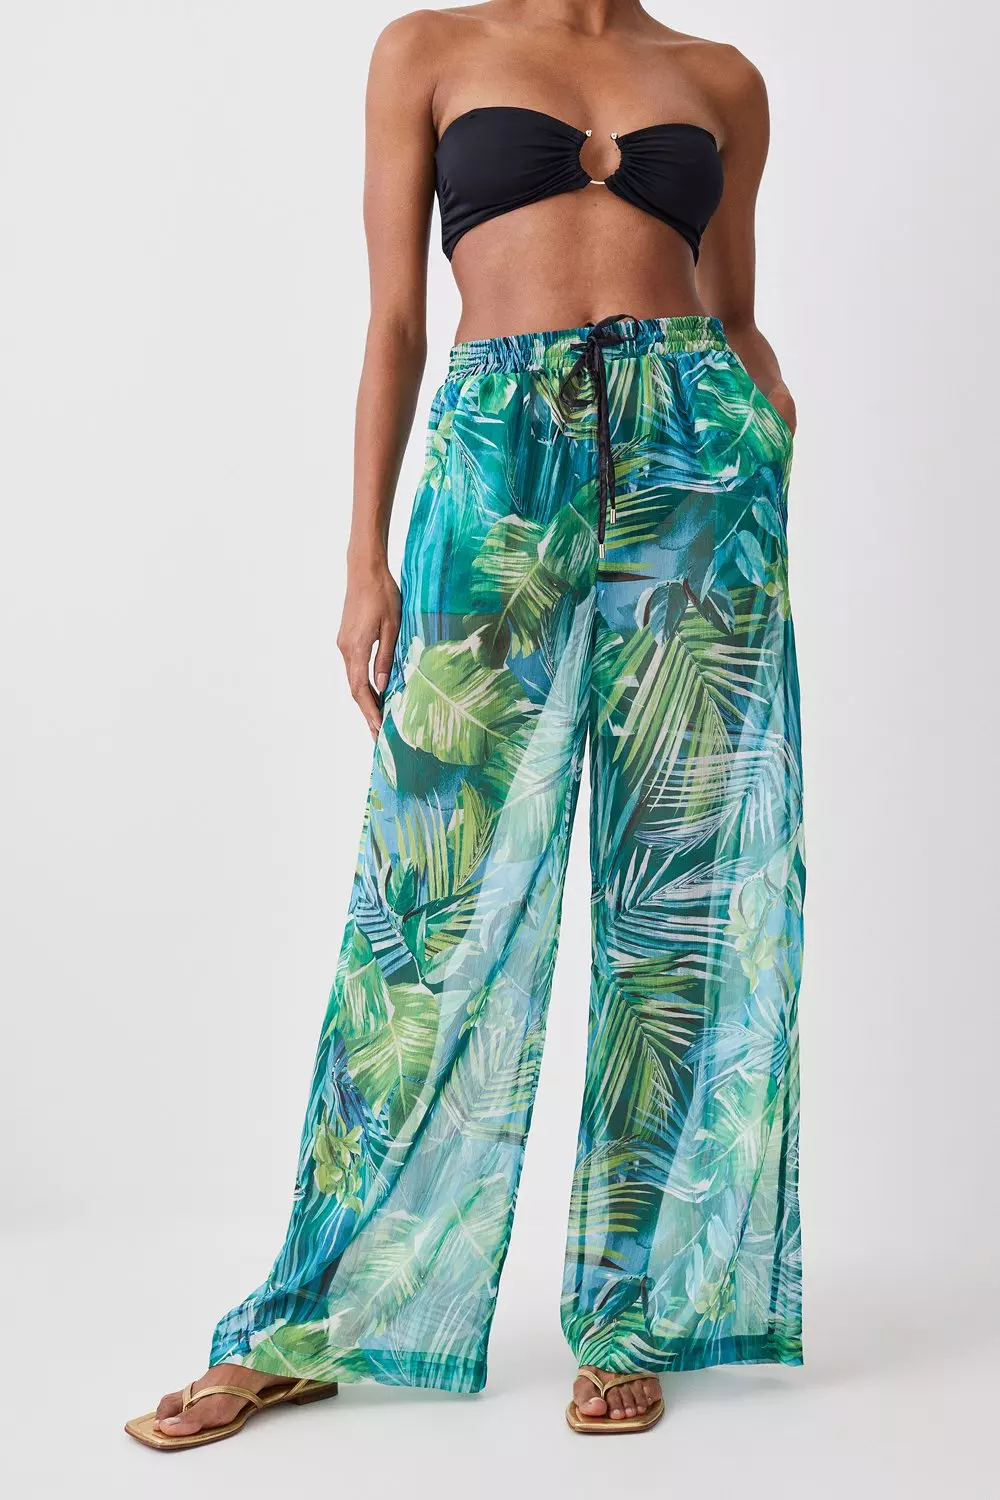 Angie Cinnamon color floral pants,100% Rayon Material, wide leg bottoms,  tie front, beach pants